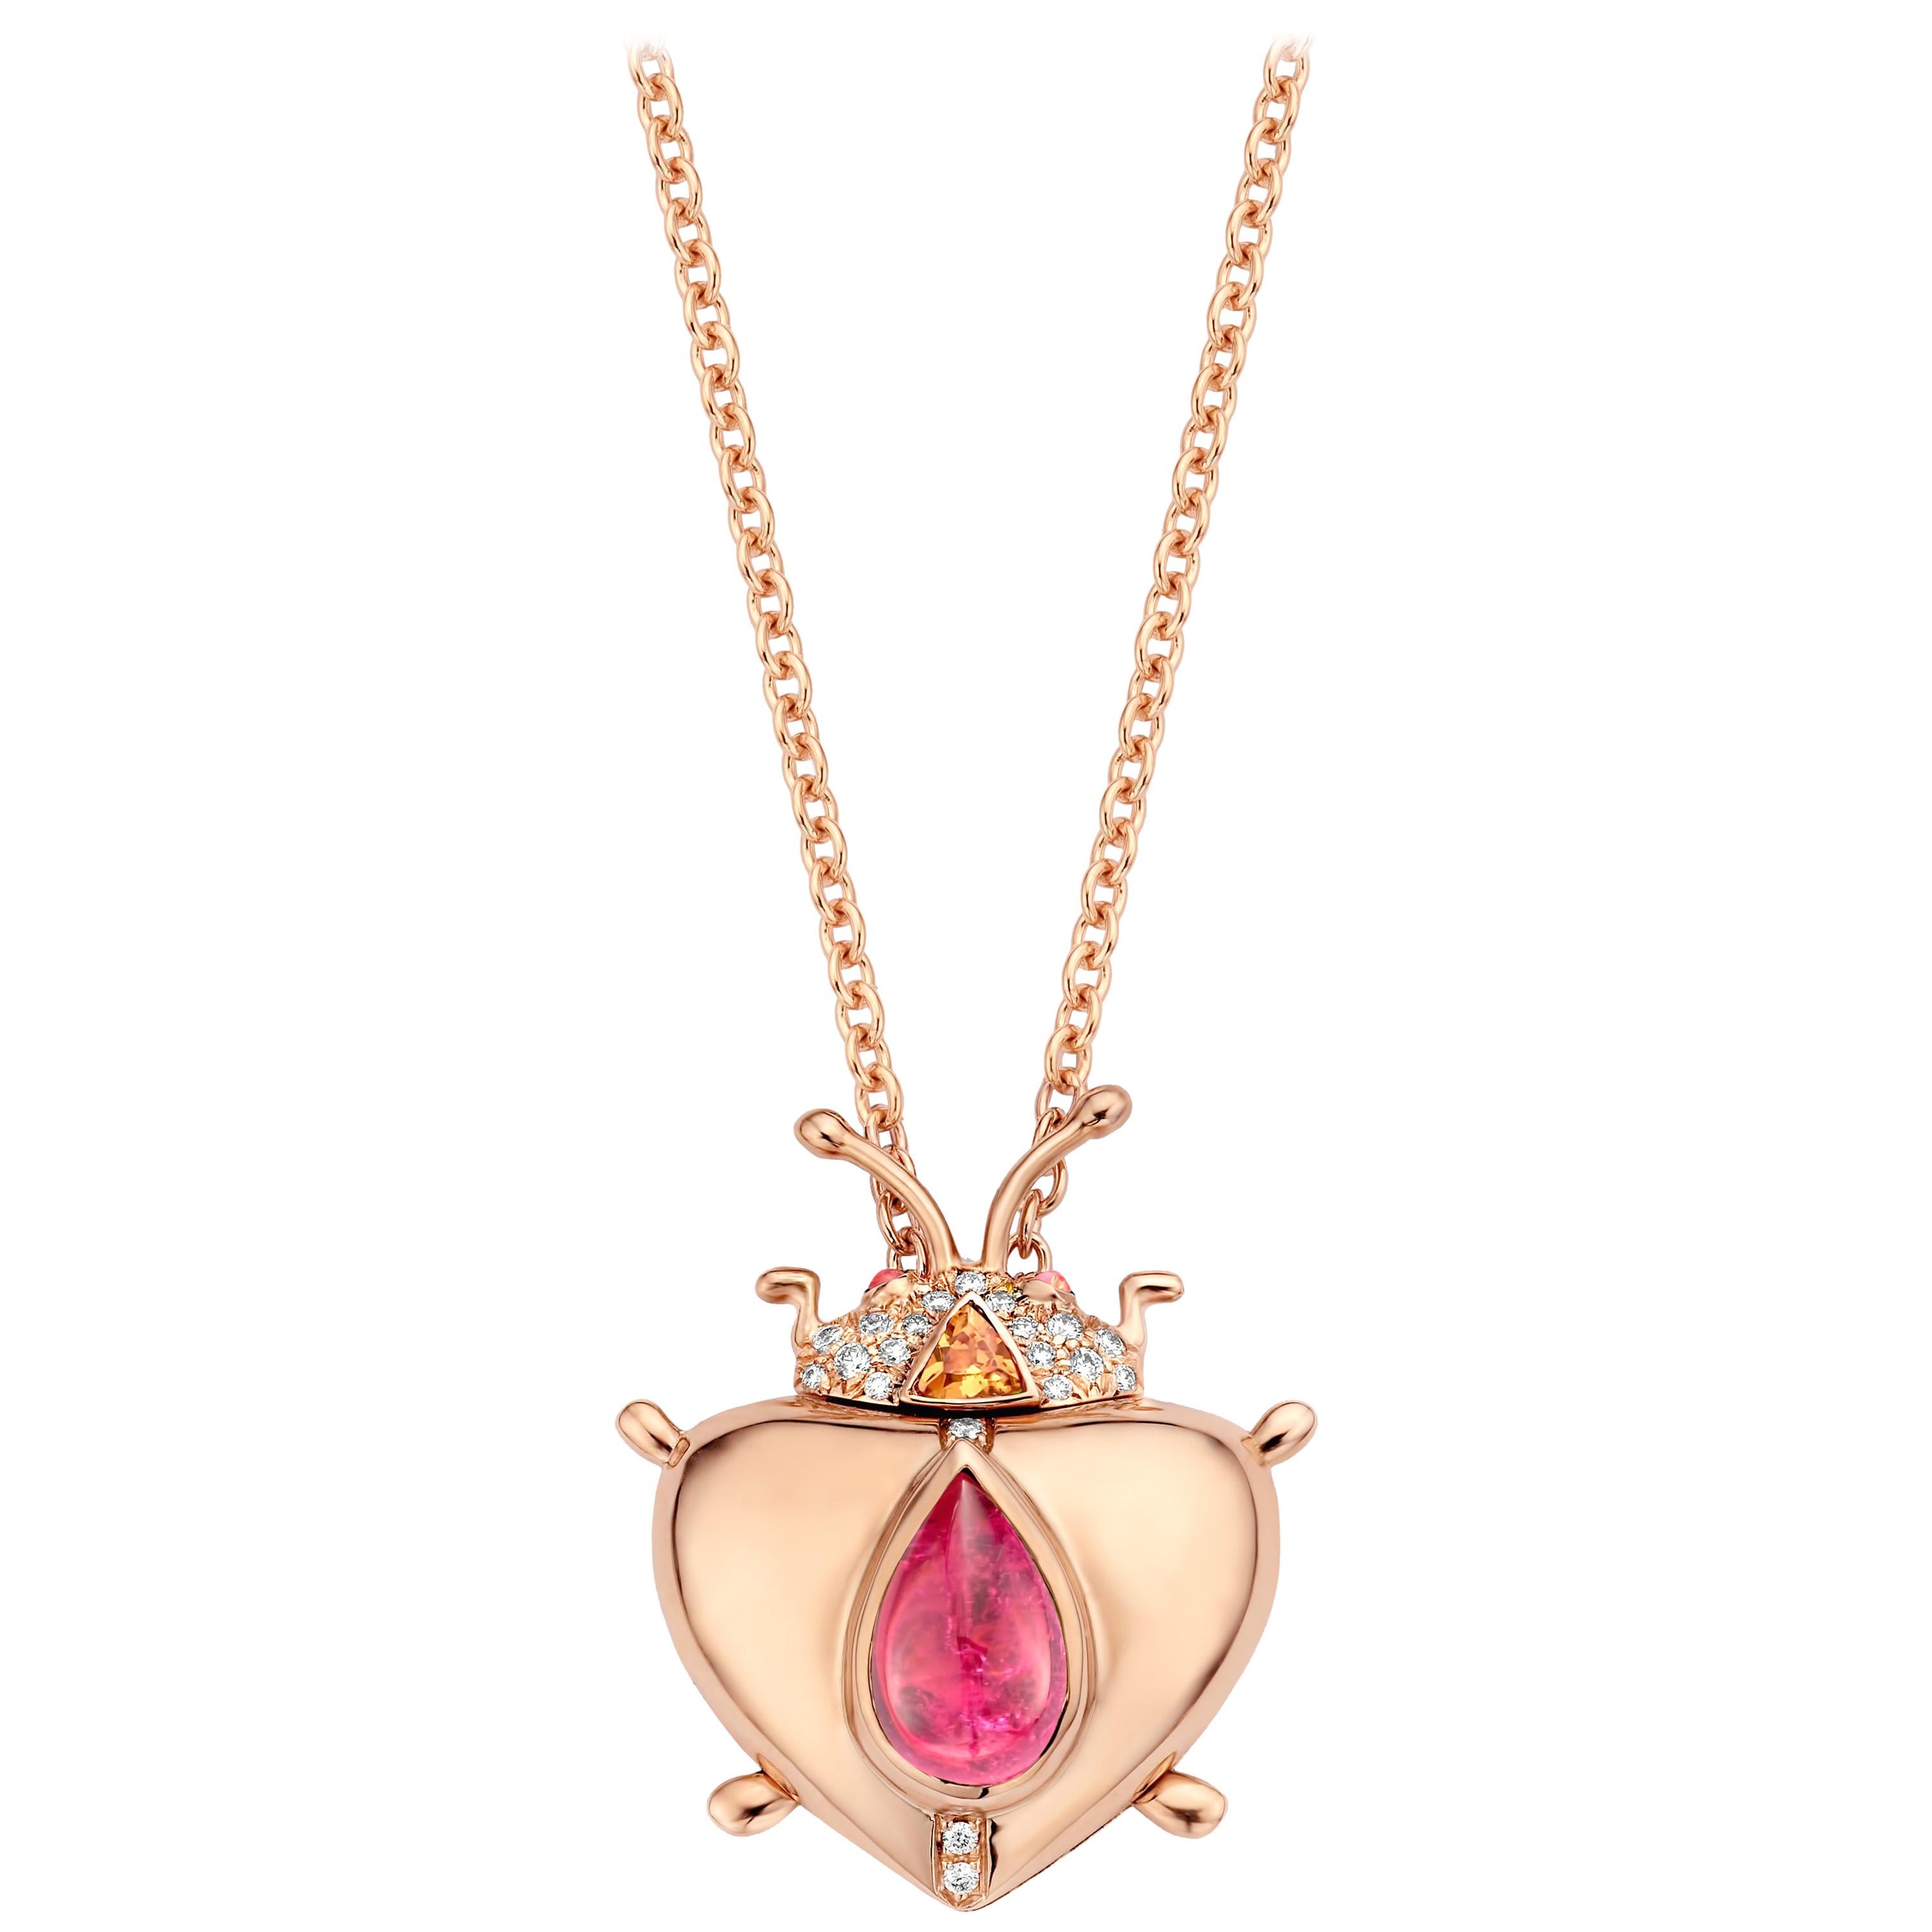 One of a kind lucky beetle necklace in 18K rose gold 17,6g set with the finest diamonds in brilliant cut 0,14Ct (VVS/DEF quality) and one natural, pink tourmaline in pear cabochon cut 1,68Ct. The head is set with a Mandarin garnet in trillion cut